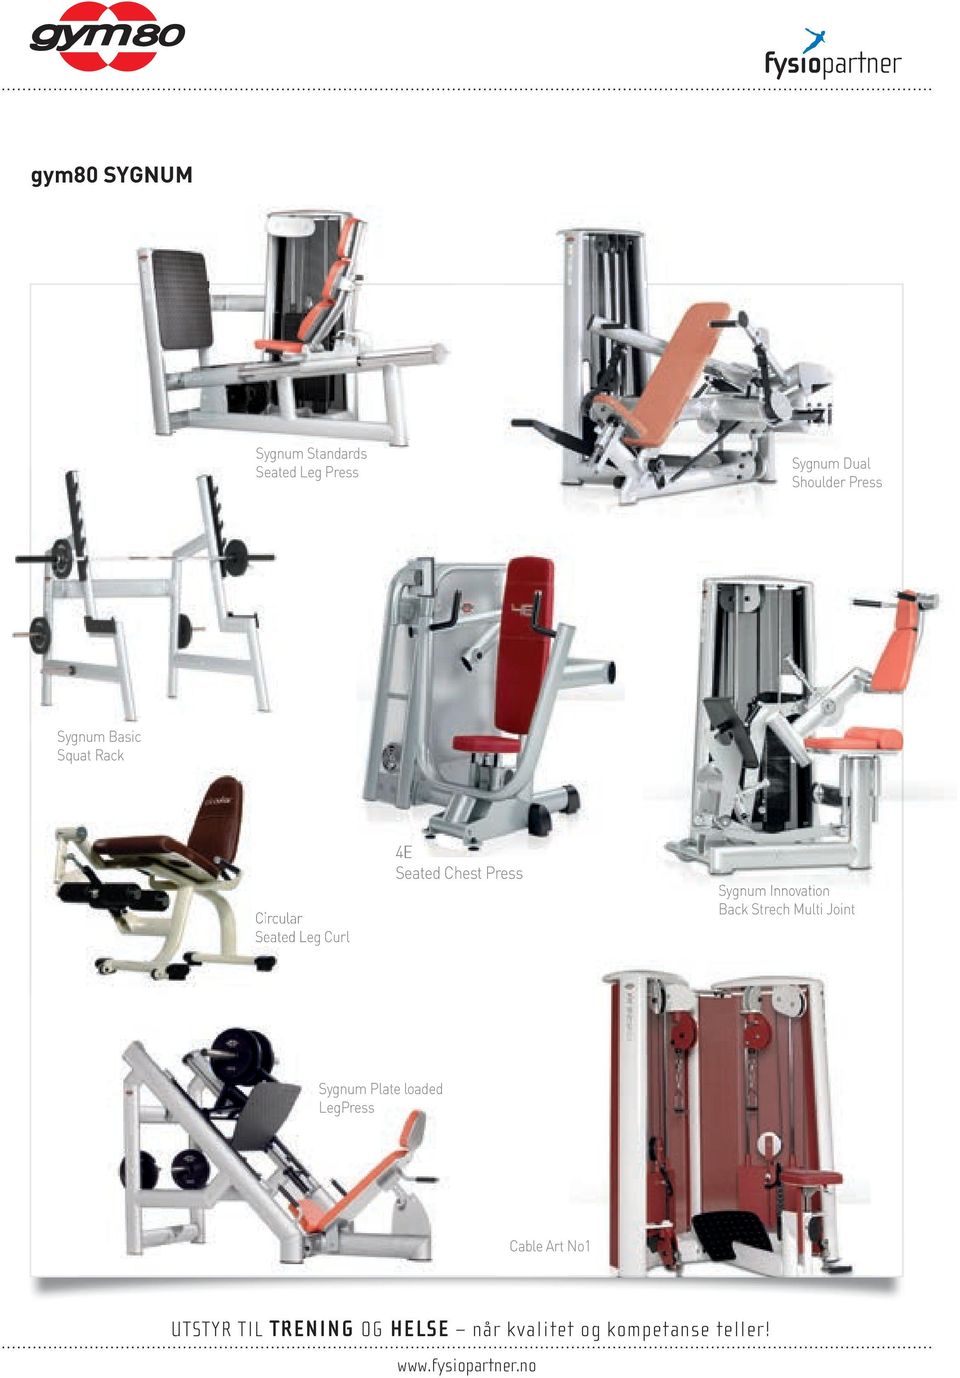 Seated Leg Curl 4E Seated Chest Press Sygnum Innovation